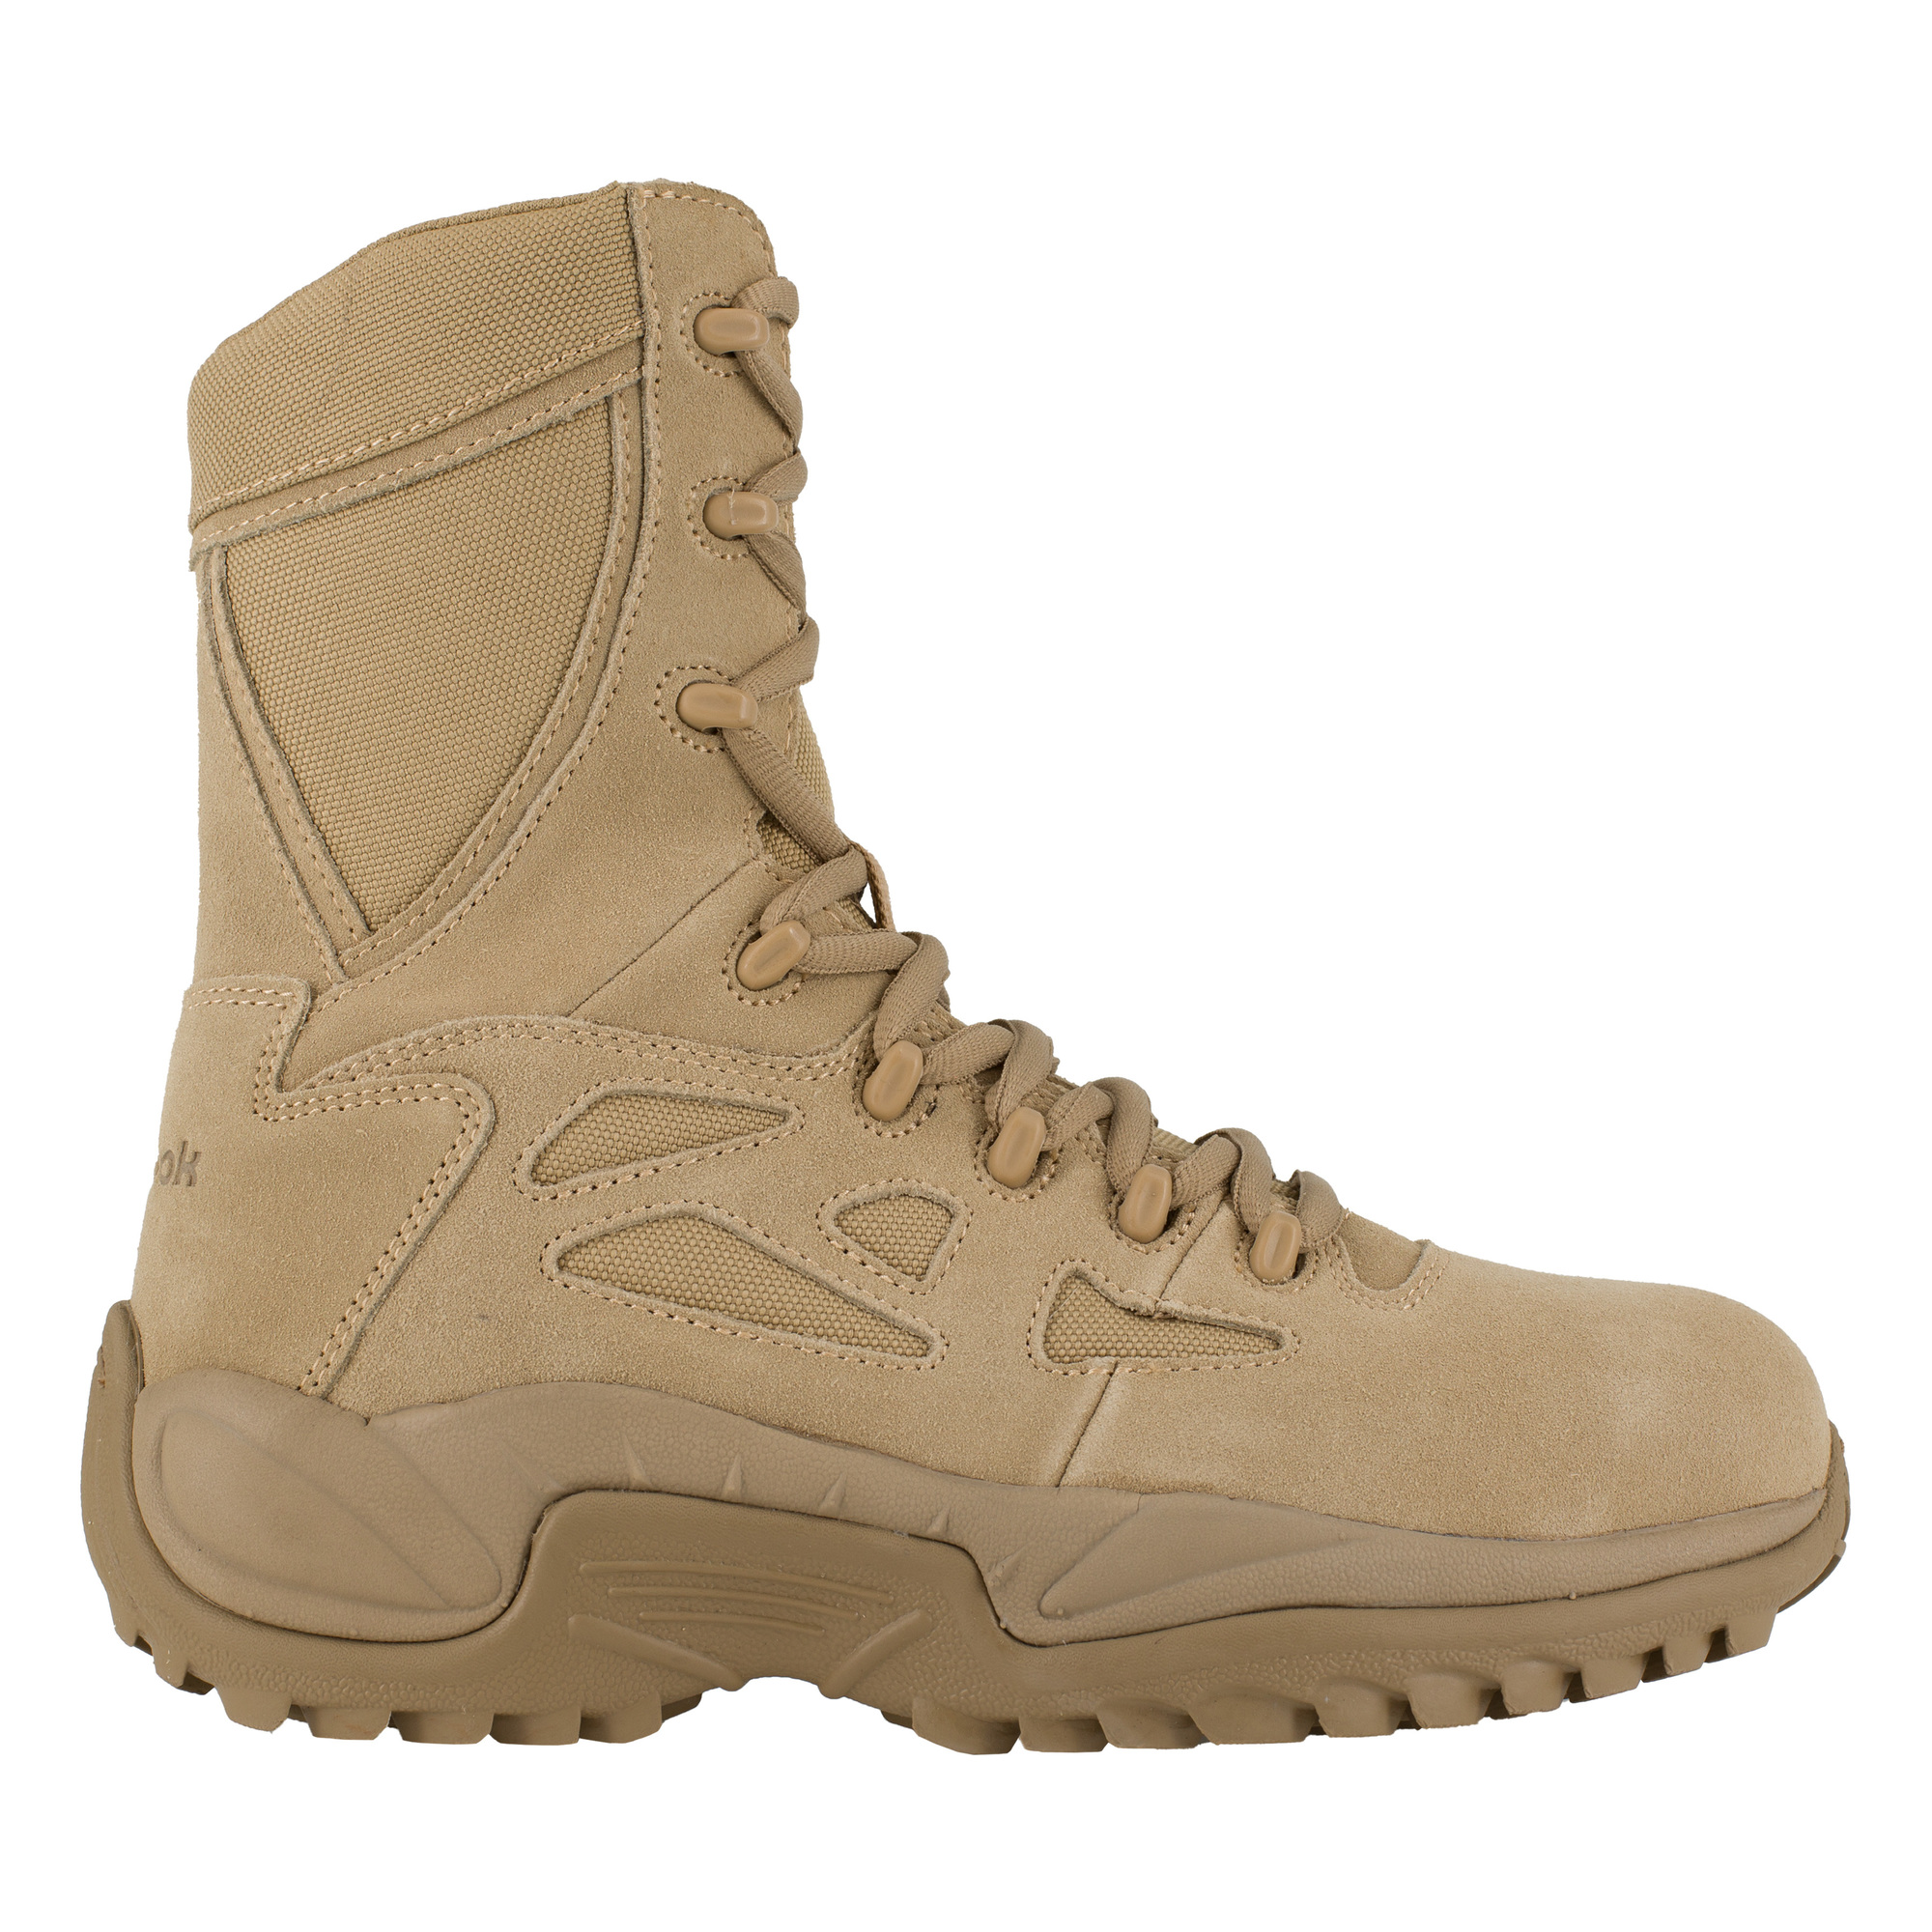 Reebok, 8Inch Stealth Tactical Boot with Side Zipper, Size 6 1/2, Width Medium, Color Desert Tan, Model RB894 -  RB894-M-06.5